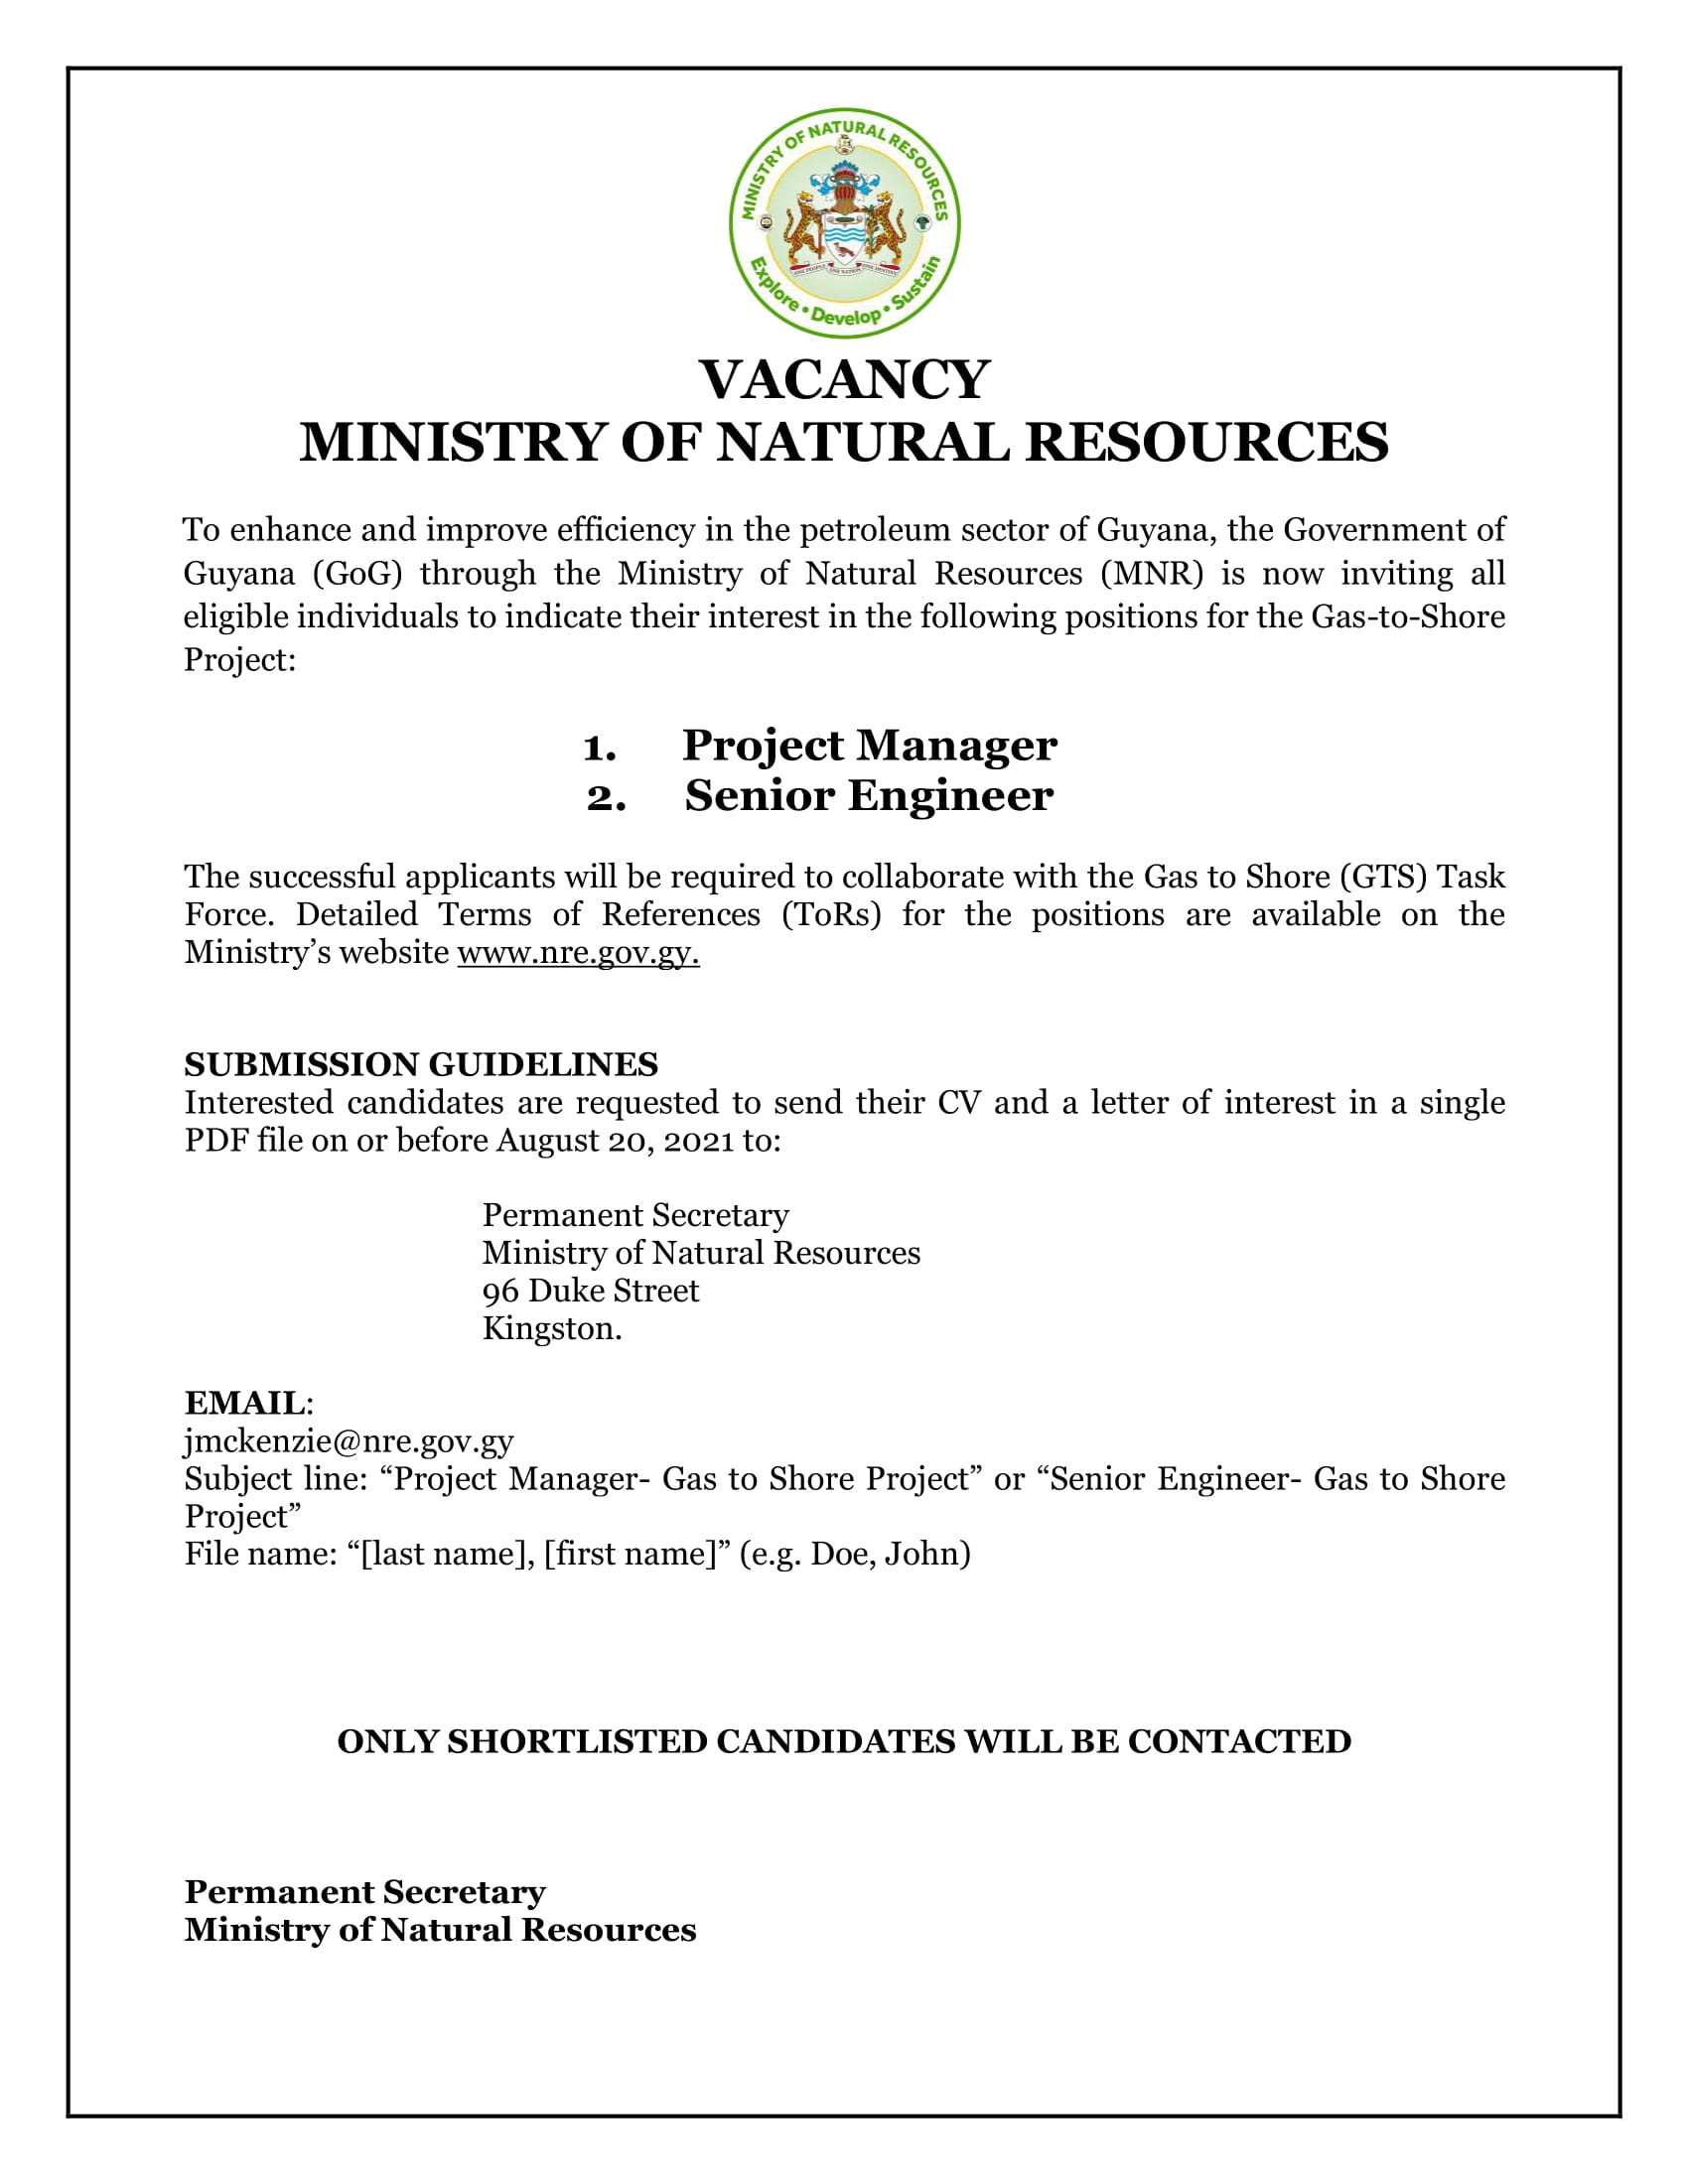 Vacancy Gas To Shore Project Ministry Of Natural Resources